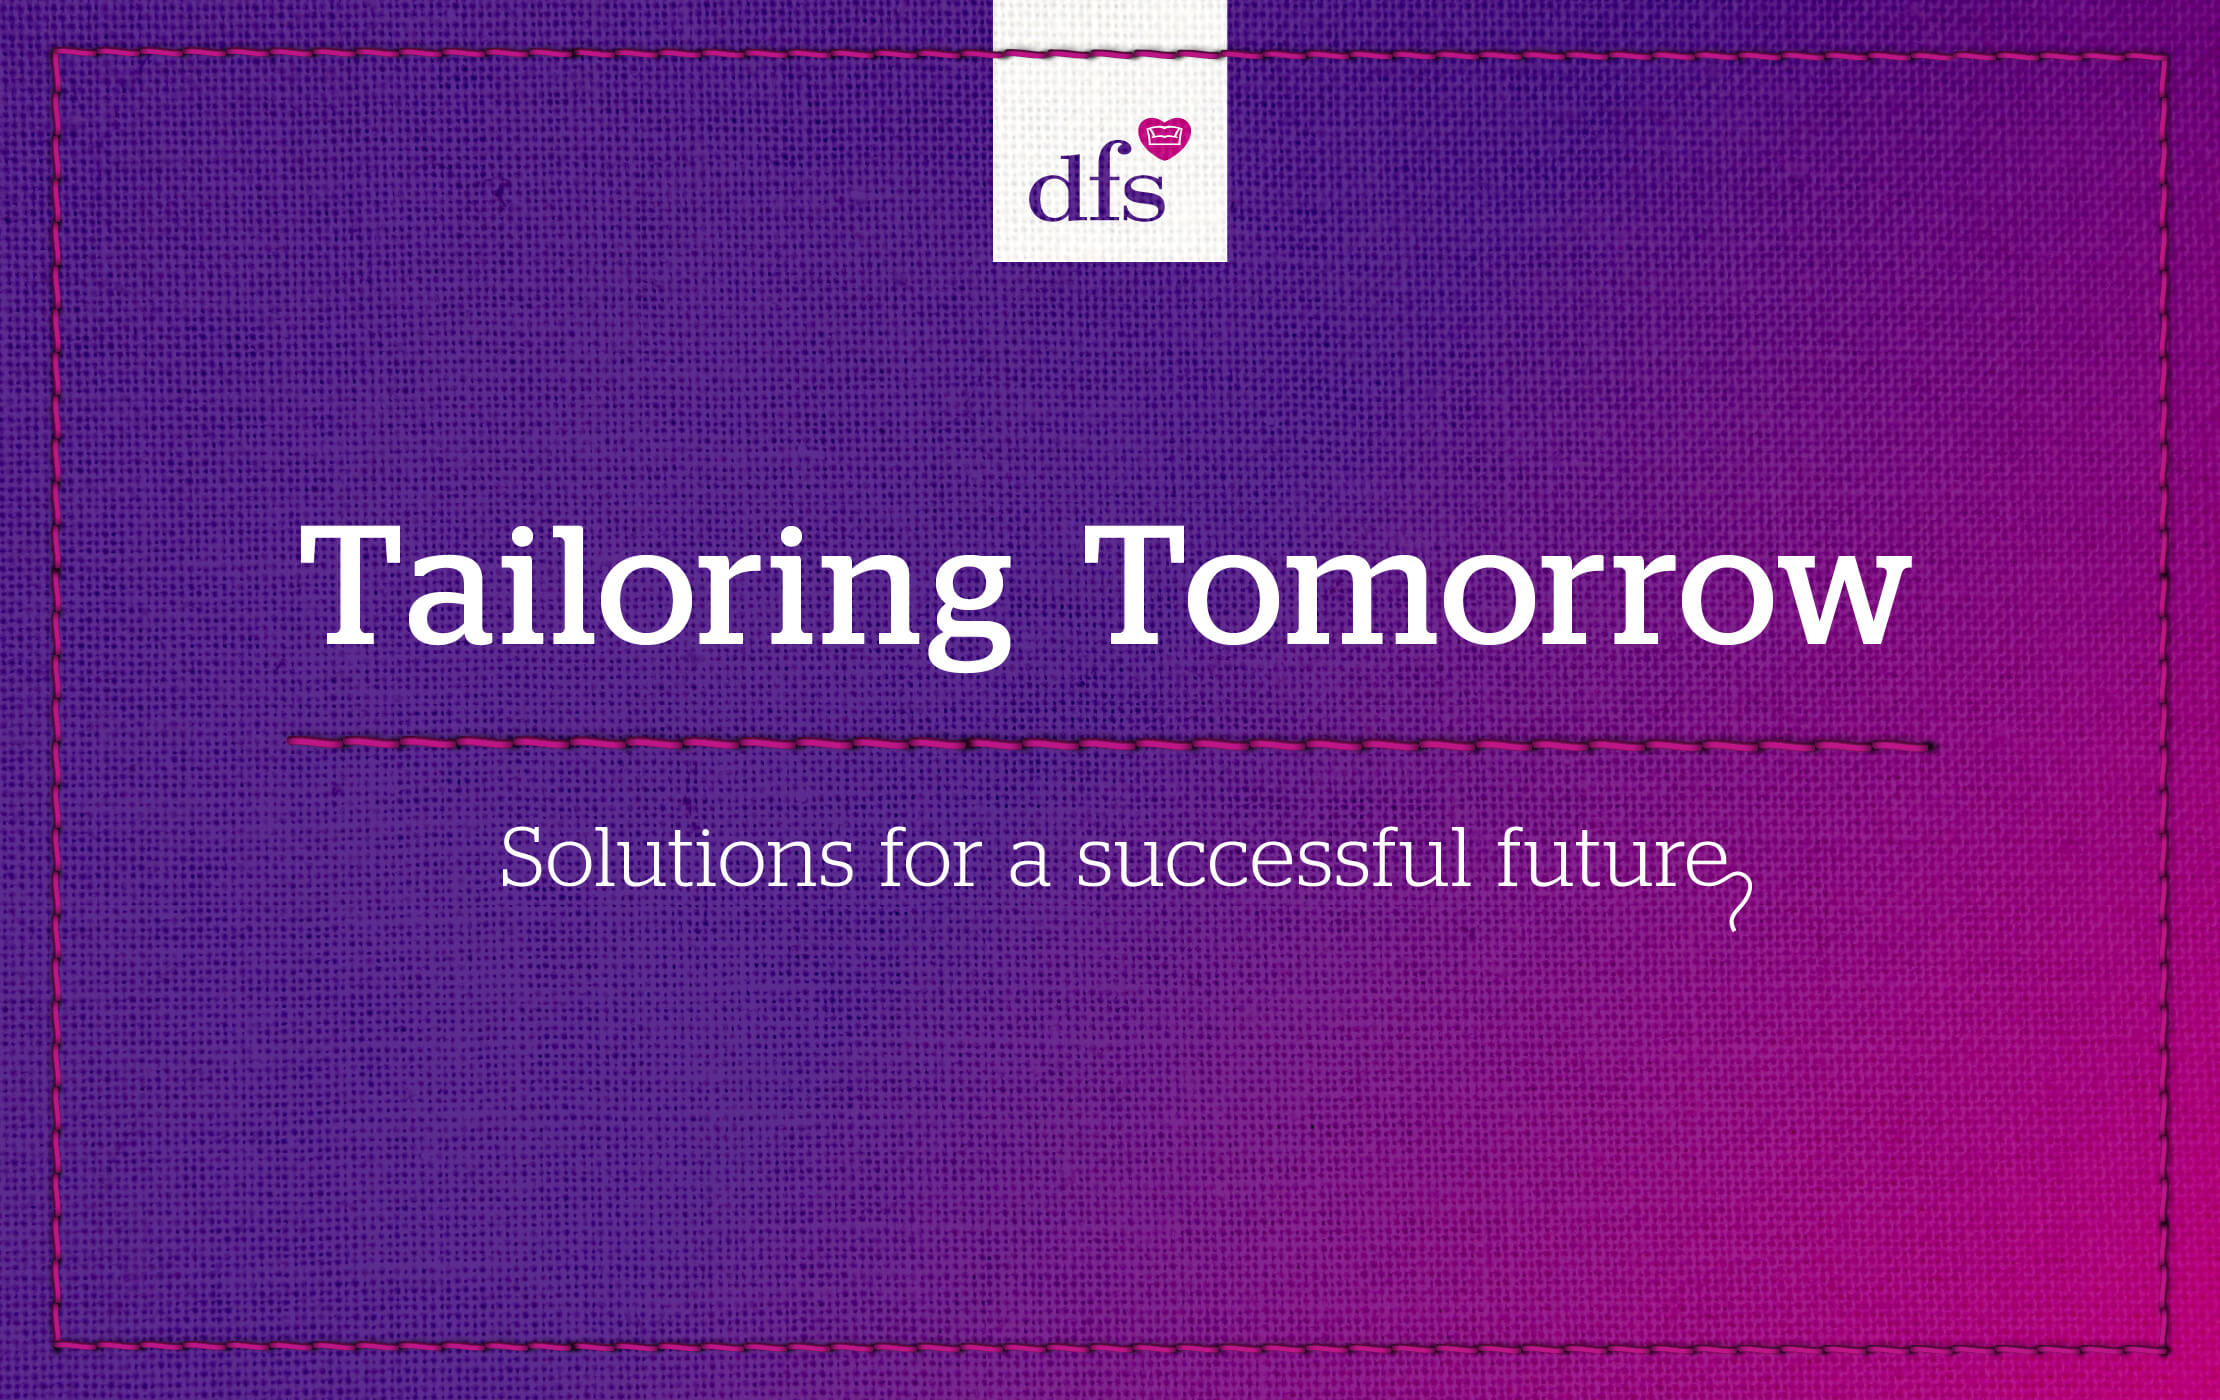 Main 'Tailoring Tomorrow' logo and accompanying tagline in white text, stitched into a purple and pink fabric background